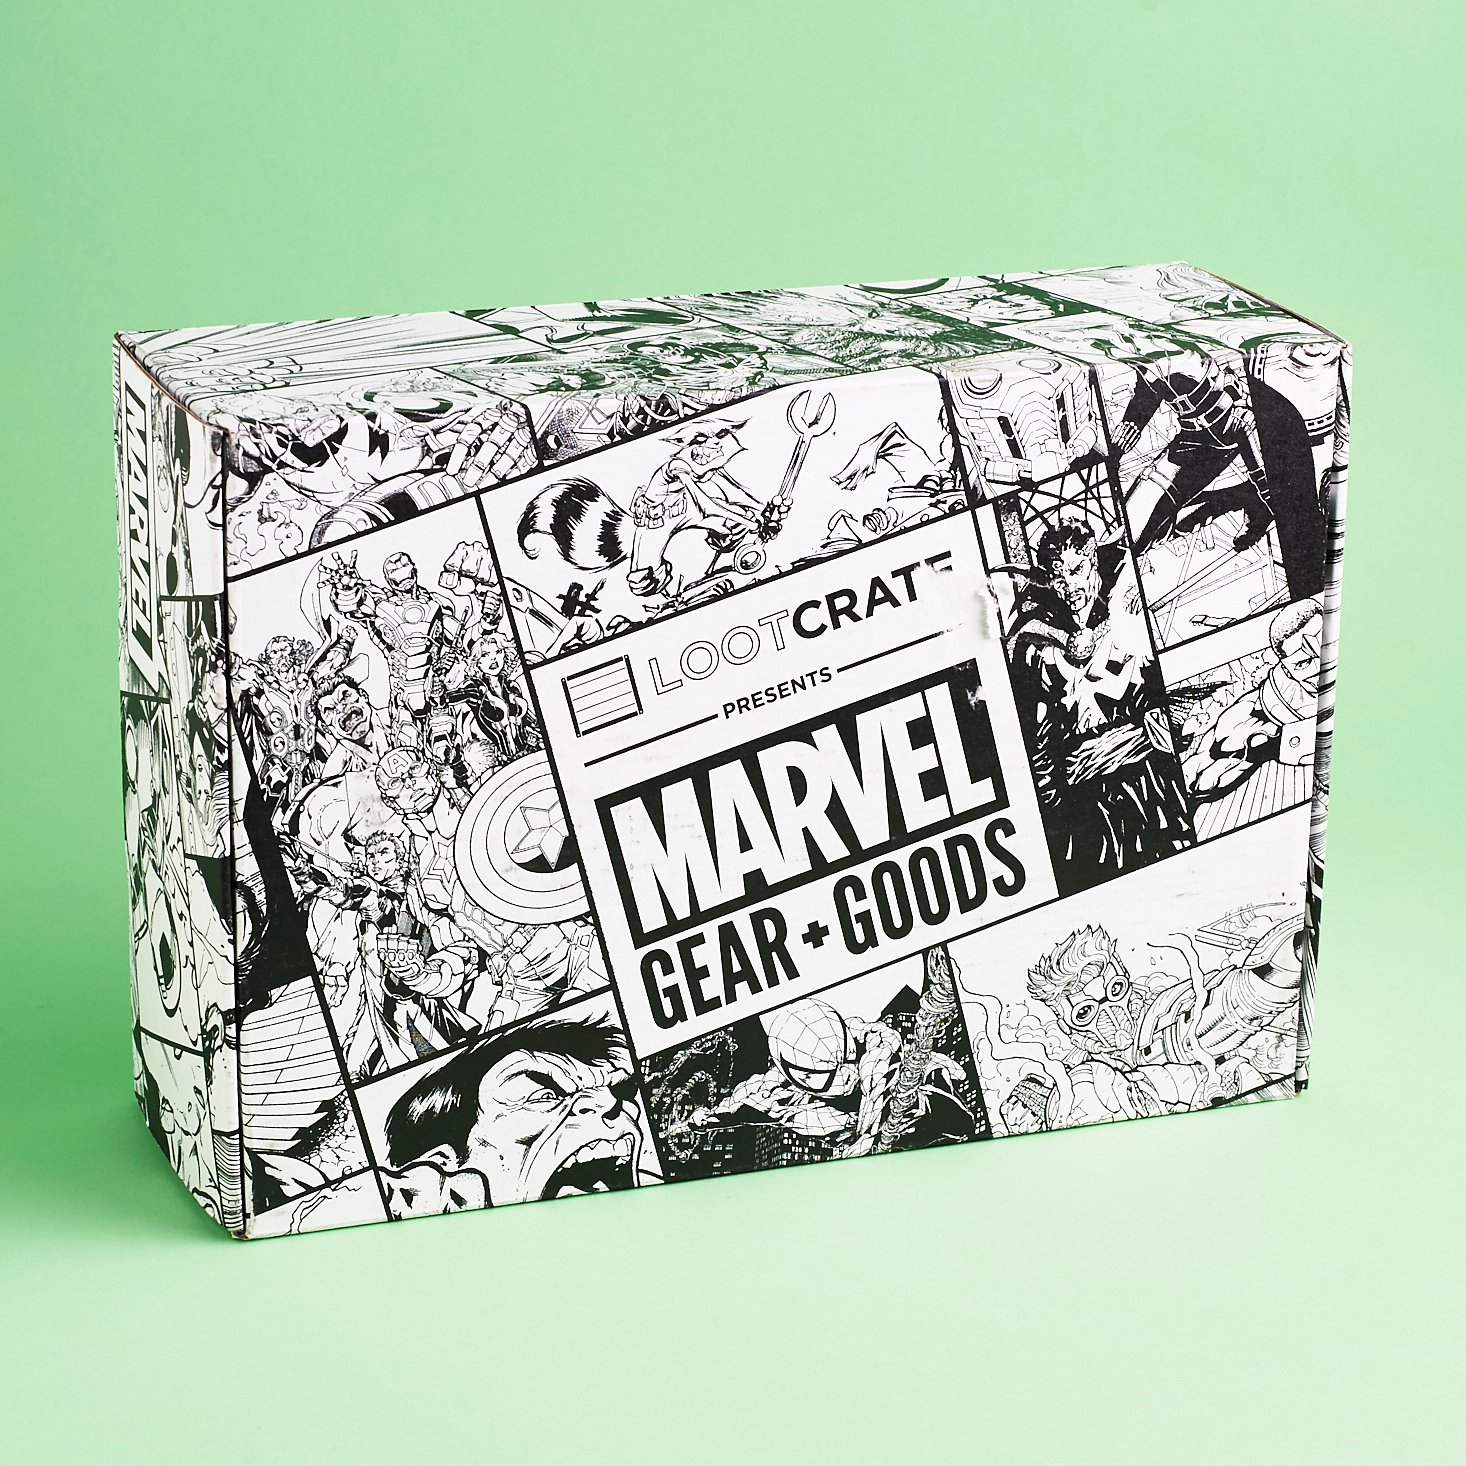 Marvel Gear + Goods by Loot Crate Review + Coupon